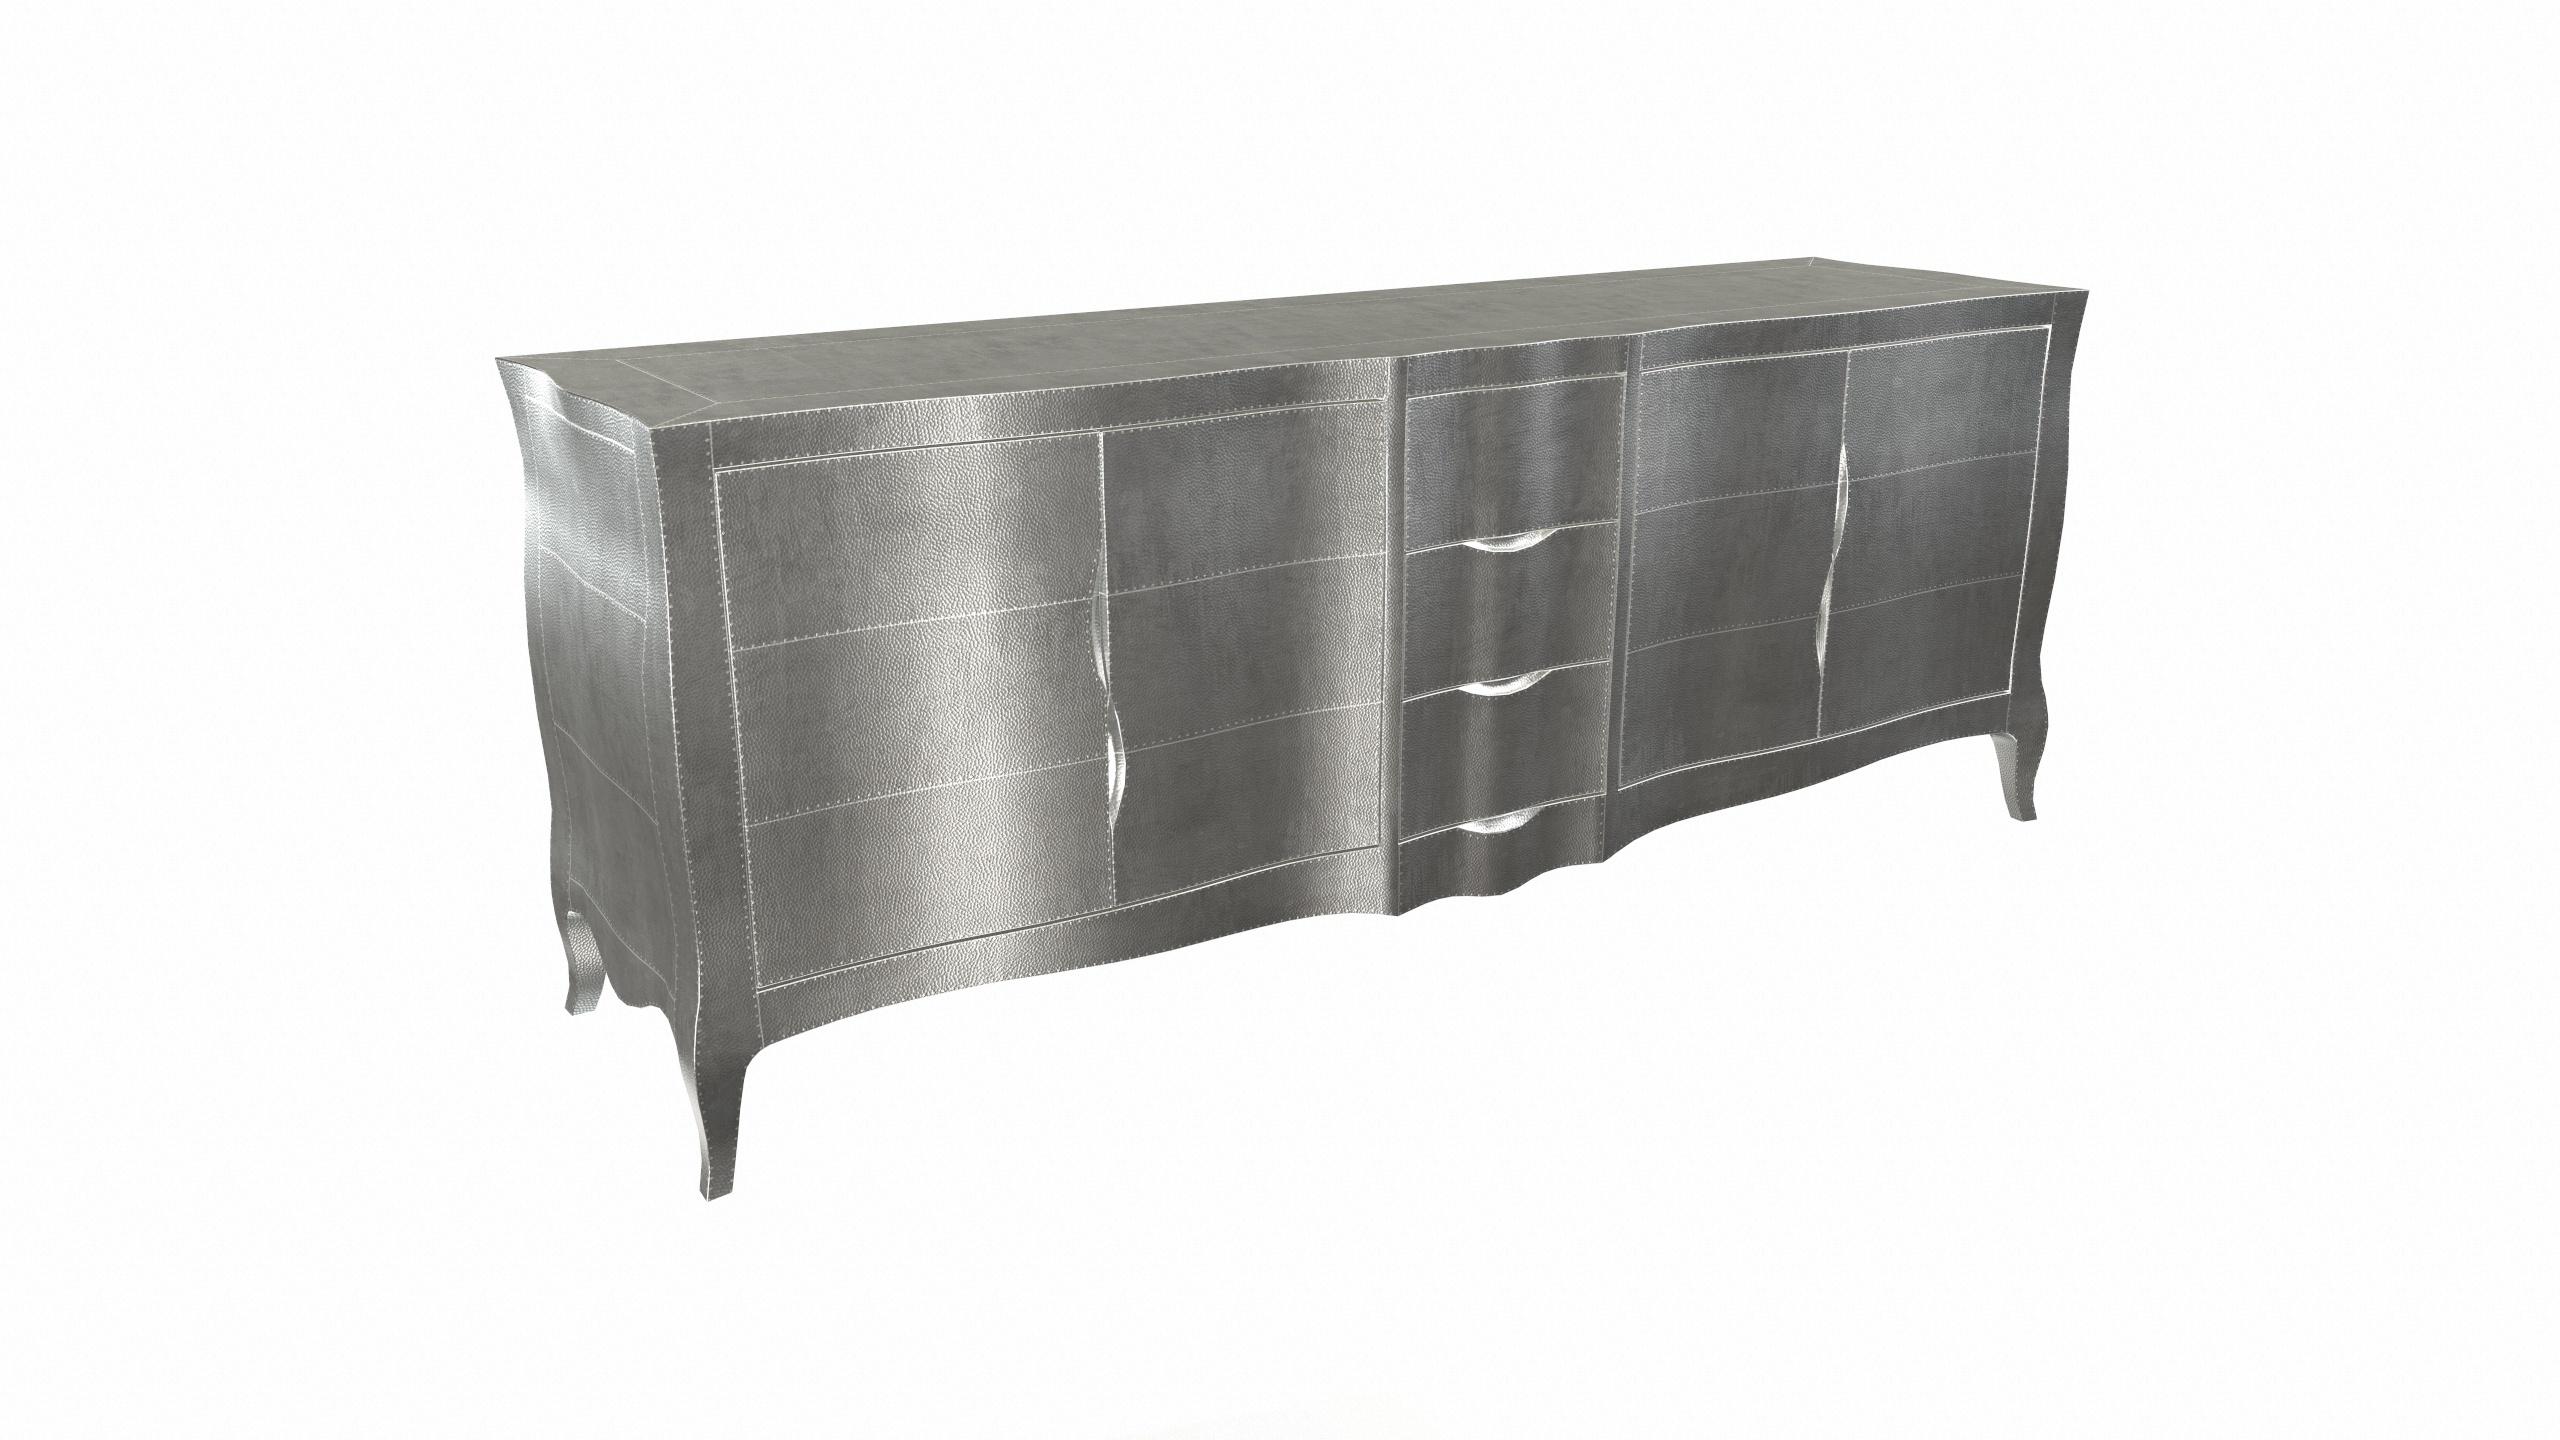 Contemporary Louise Credenza Art Deco Sideboard in Mid. Hammered White Bronze by Paul Mathieu For Sale